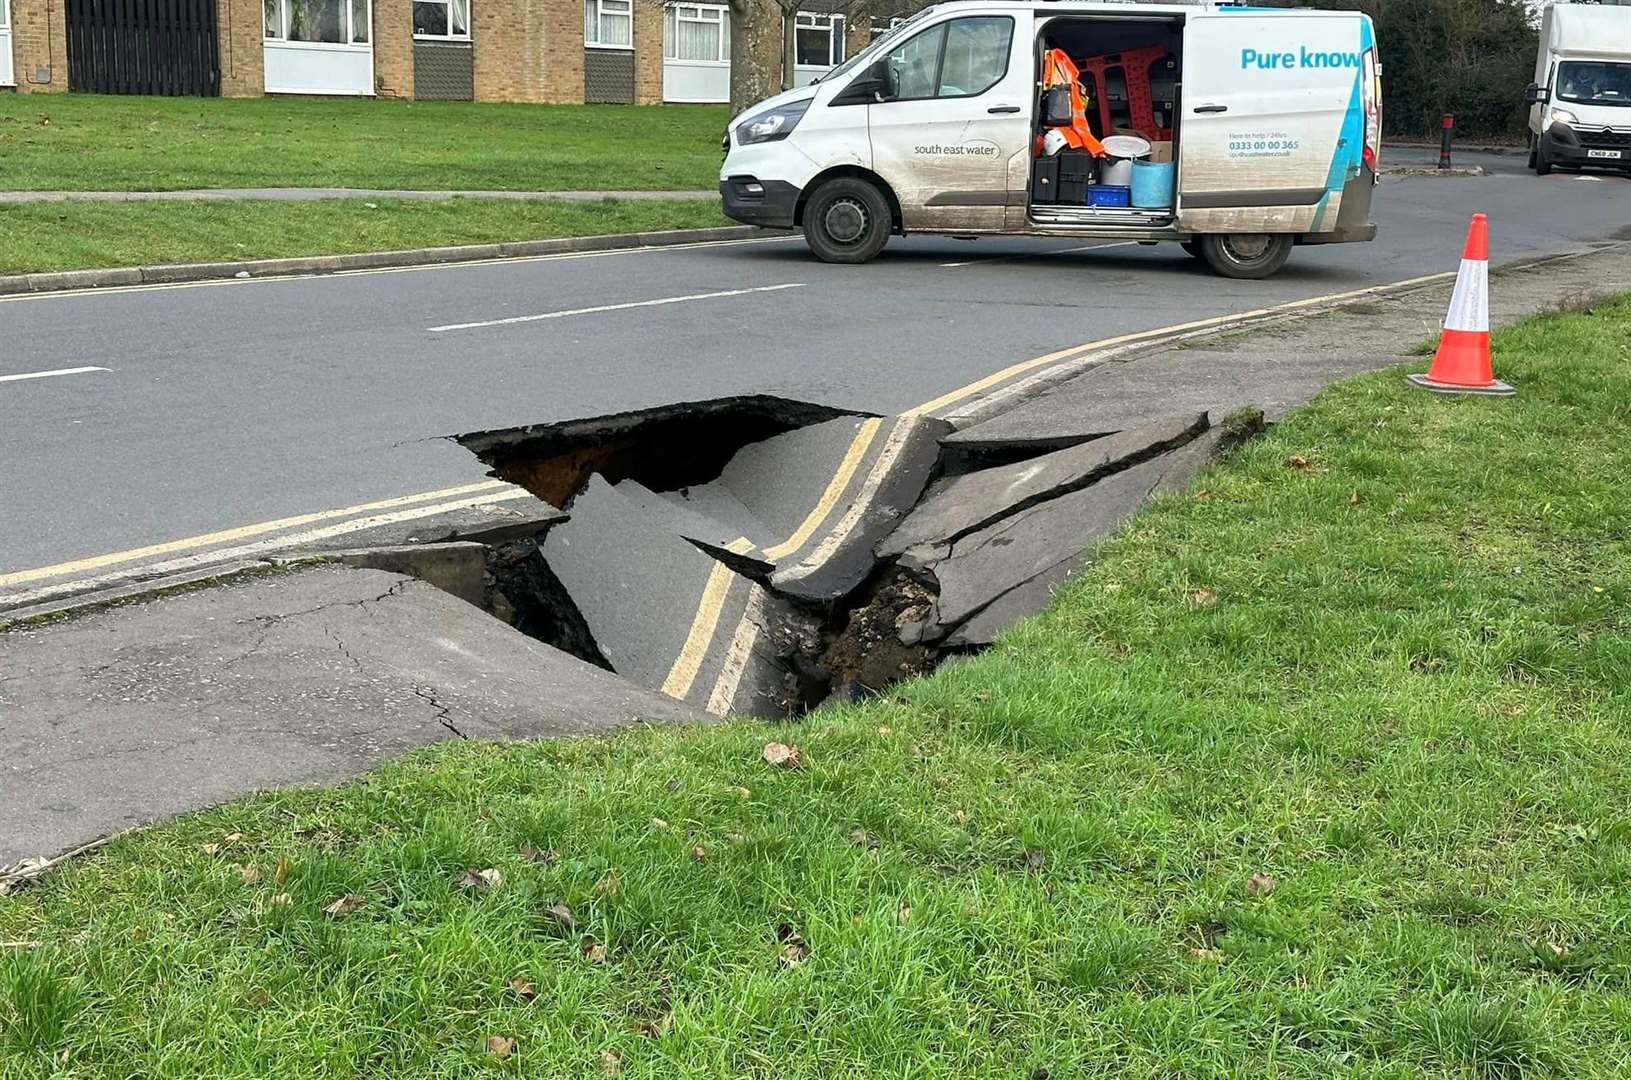 The sinkhole opened up last month